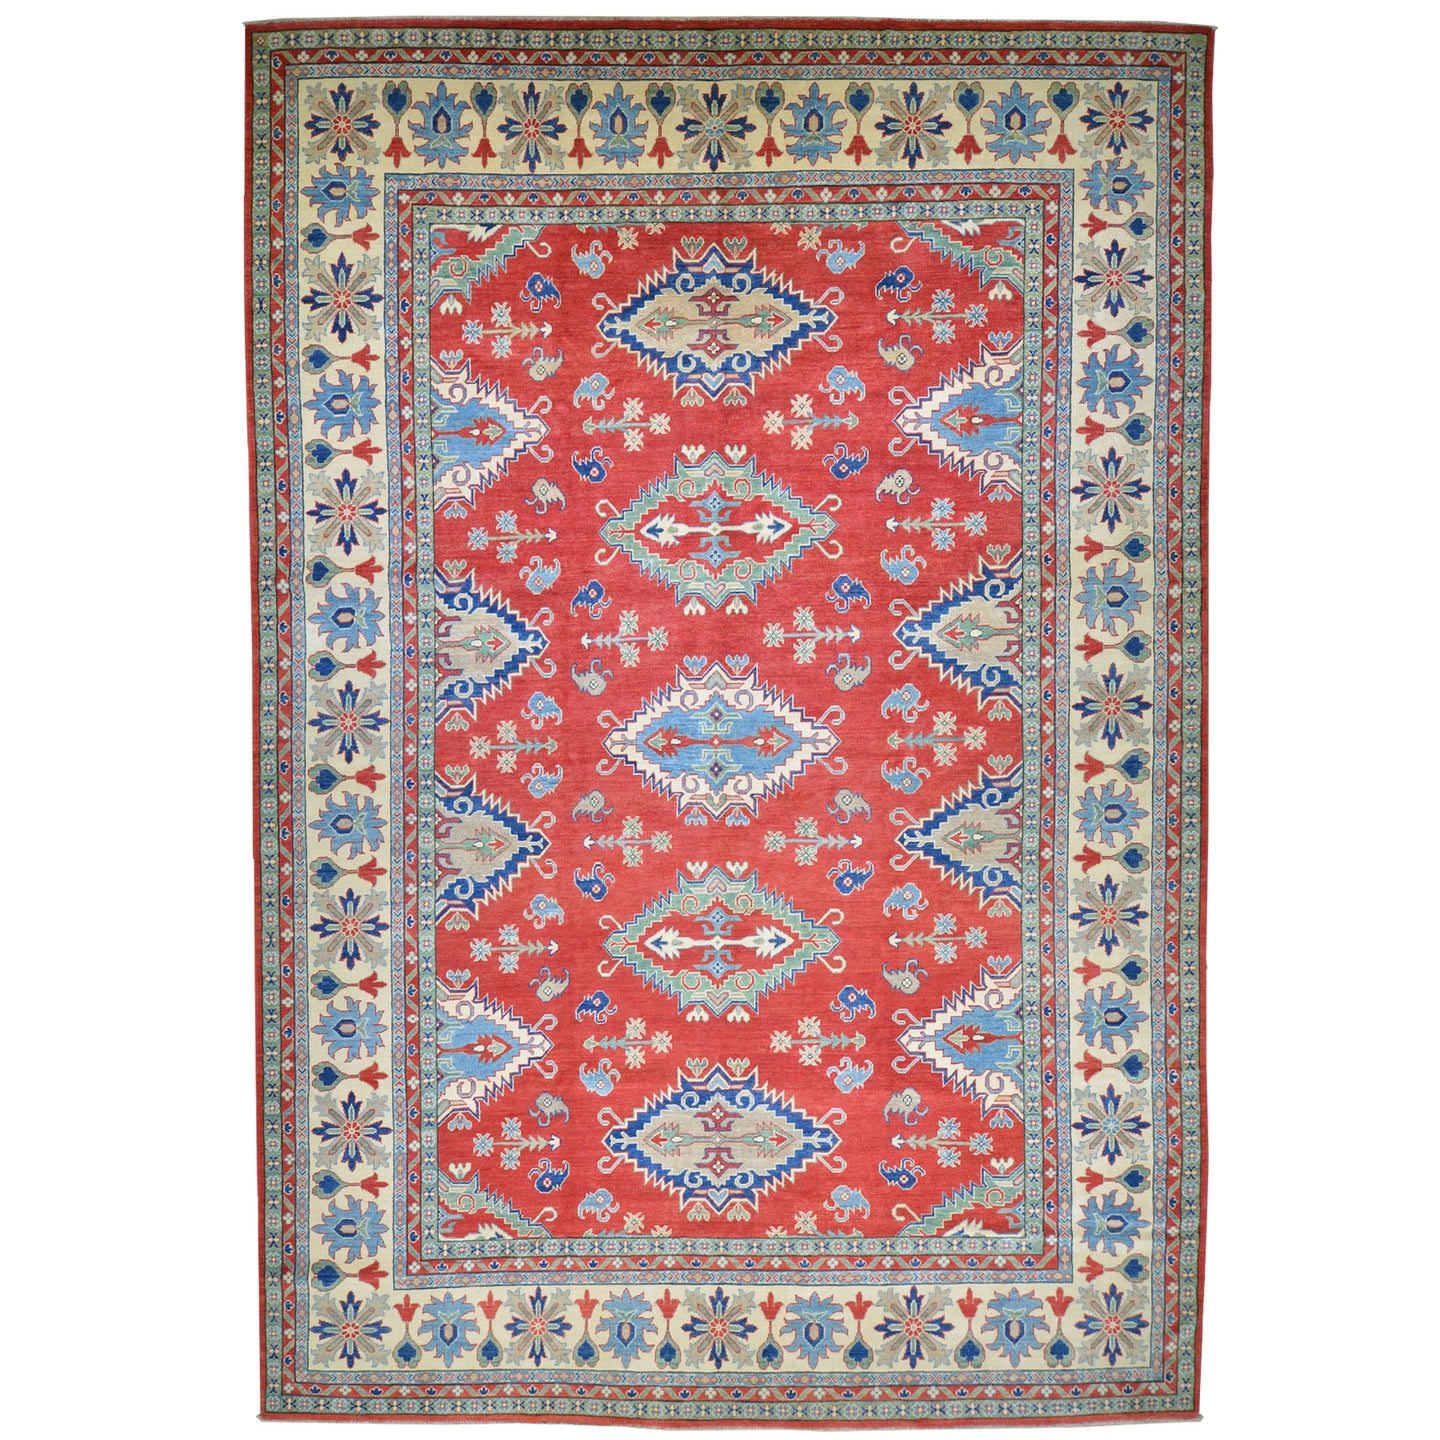 Oriental rugs, hand-knotted carpets, sustainable rugs, classic world oriental rugs, handmade, United States, interior design,  Brrsf-552